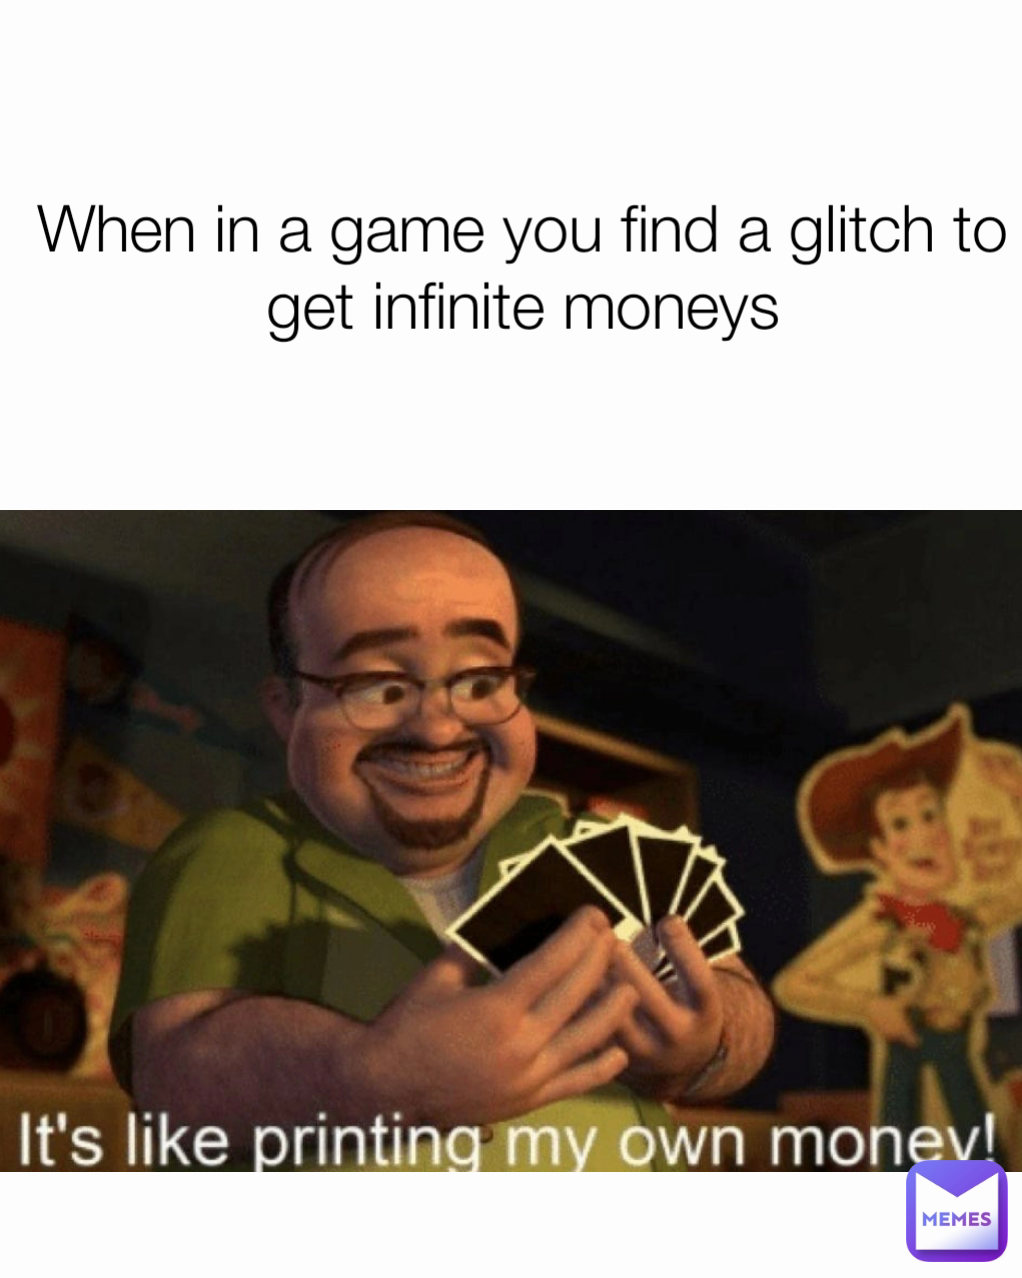 When in a game you find a glitch to get infinite moneys